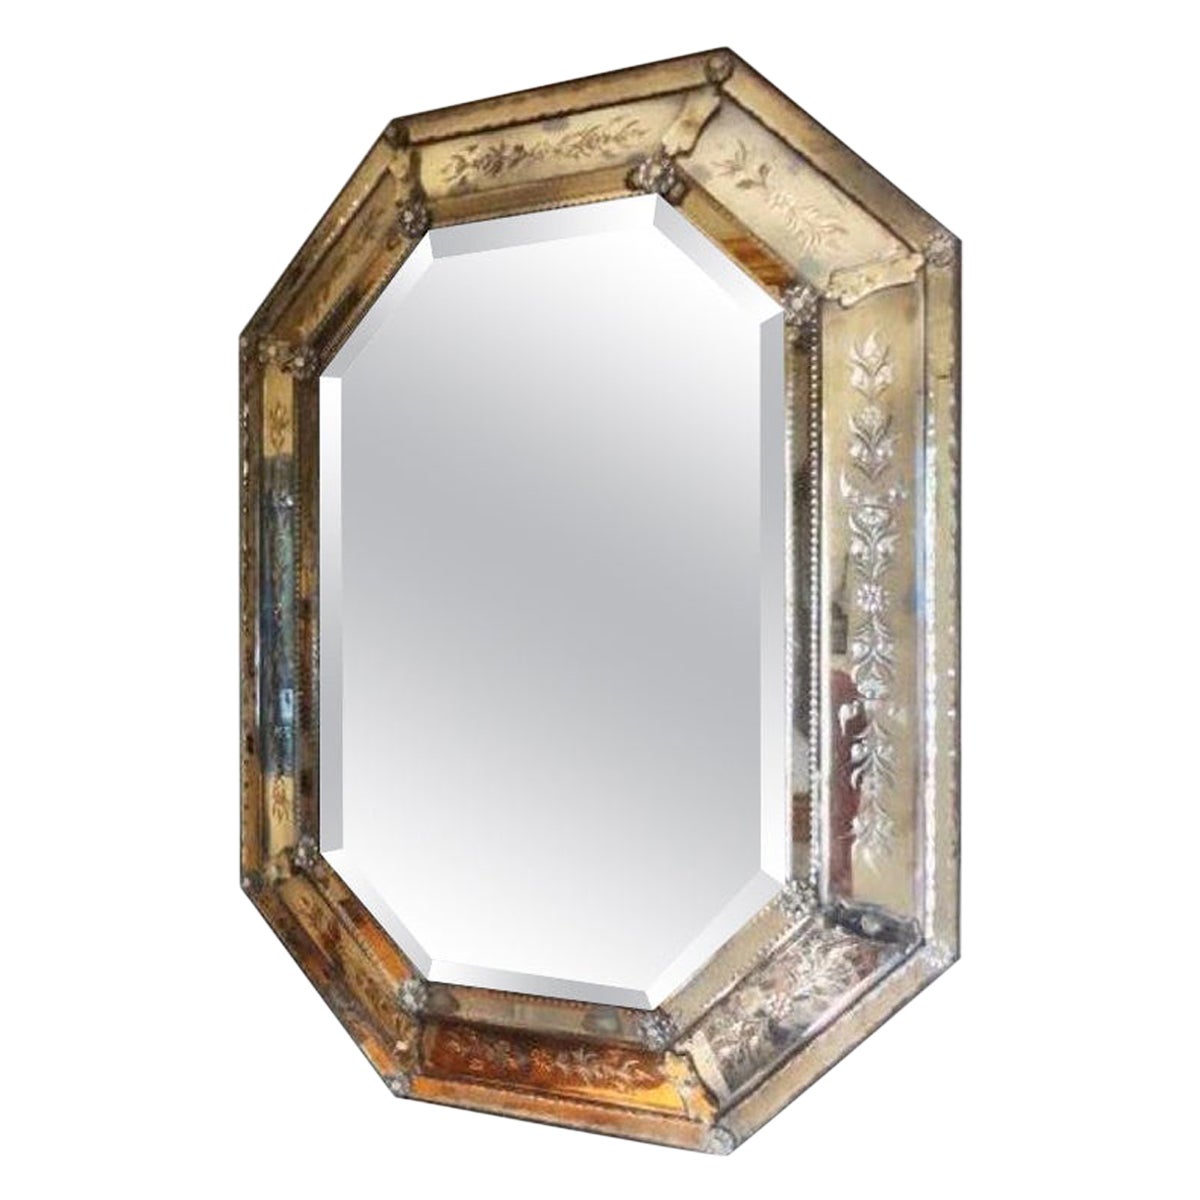 19th Century Etched and Beveled Octagonal Venetian Mirror